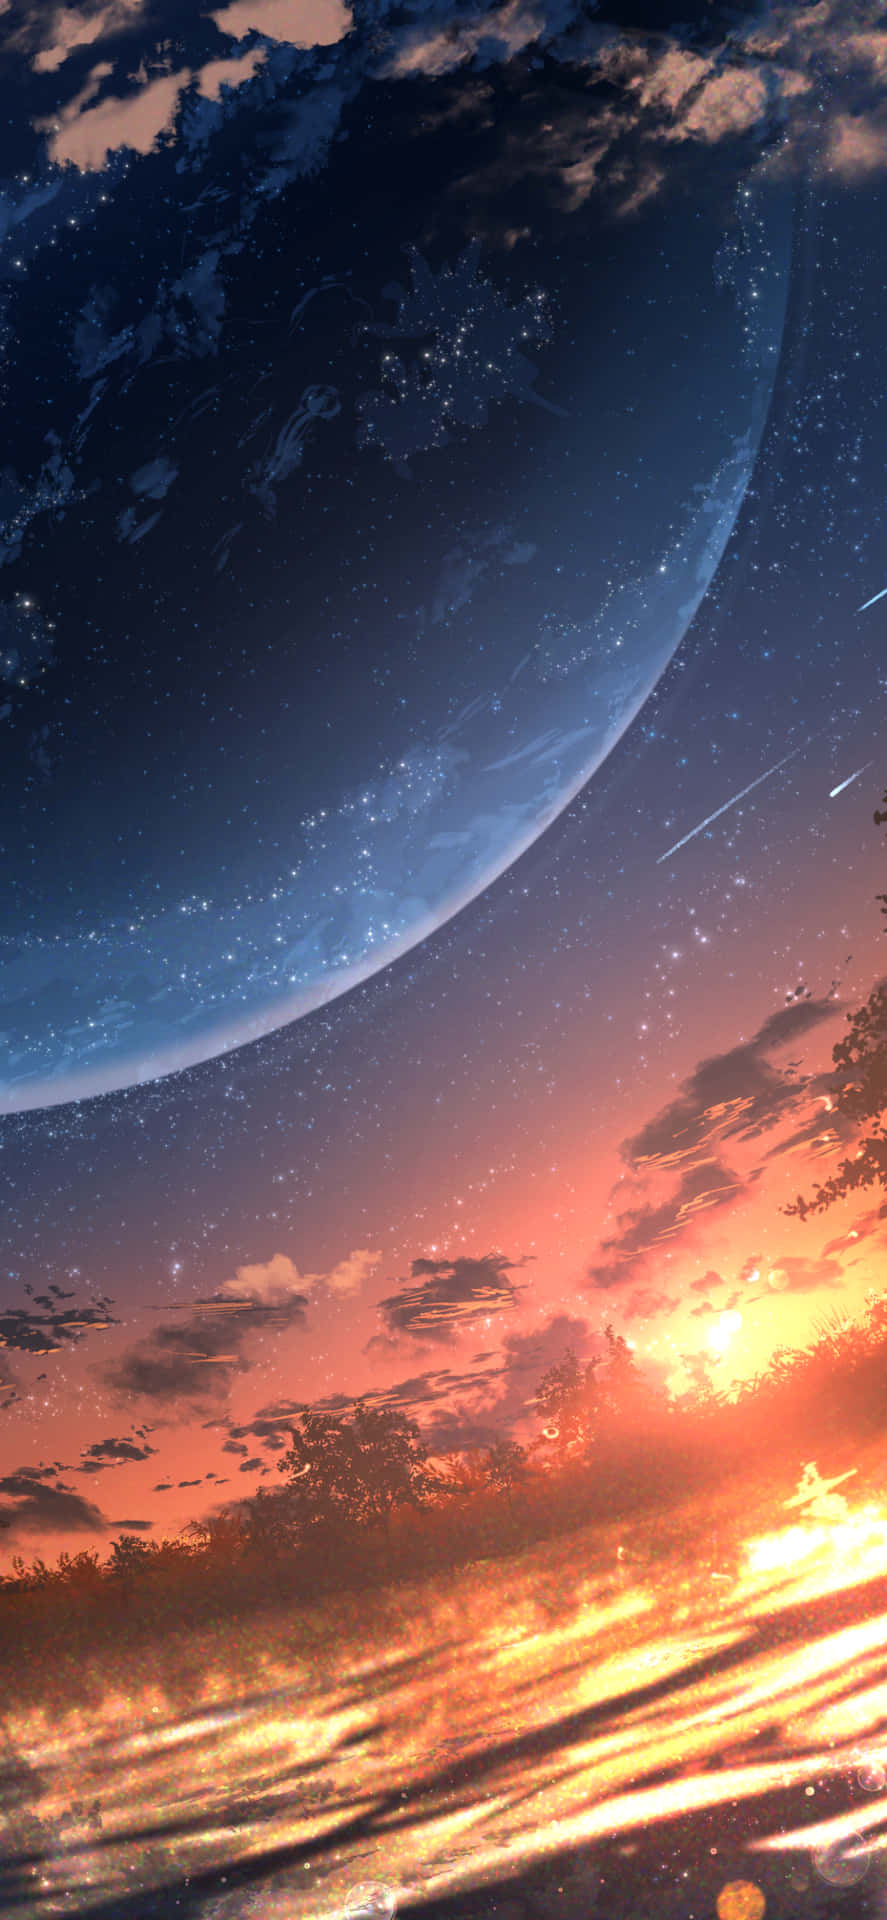 Enjoy the Anime Sunset from your iPhone Wallpaper